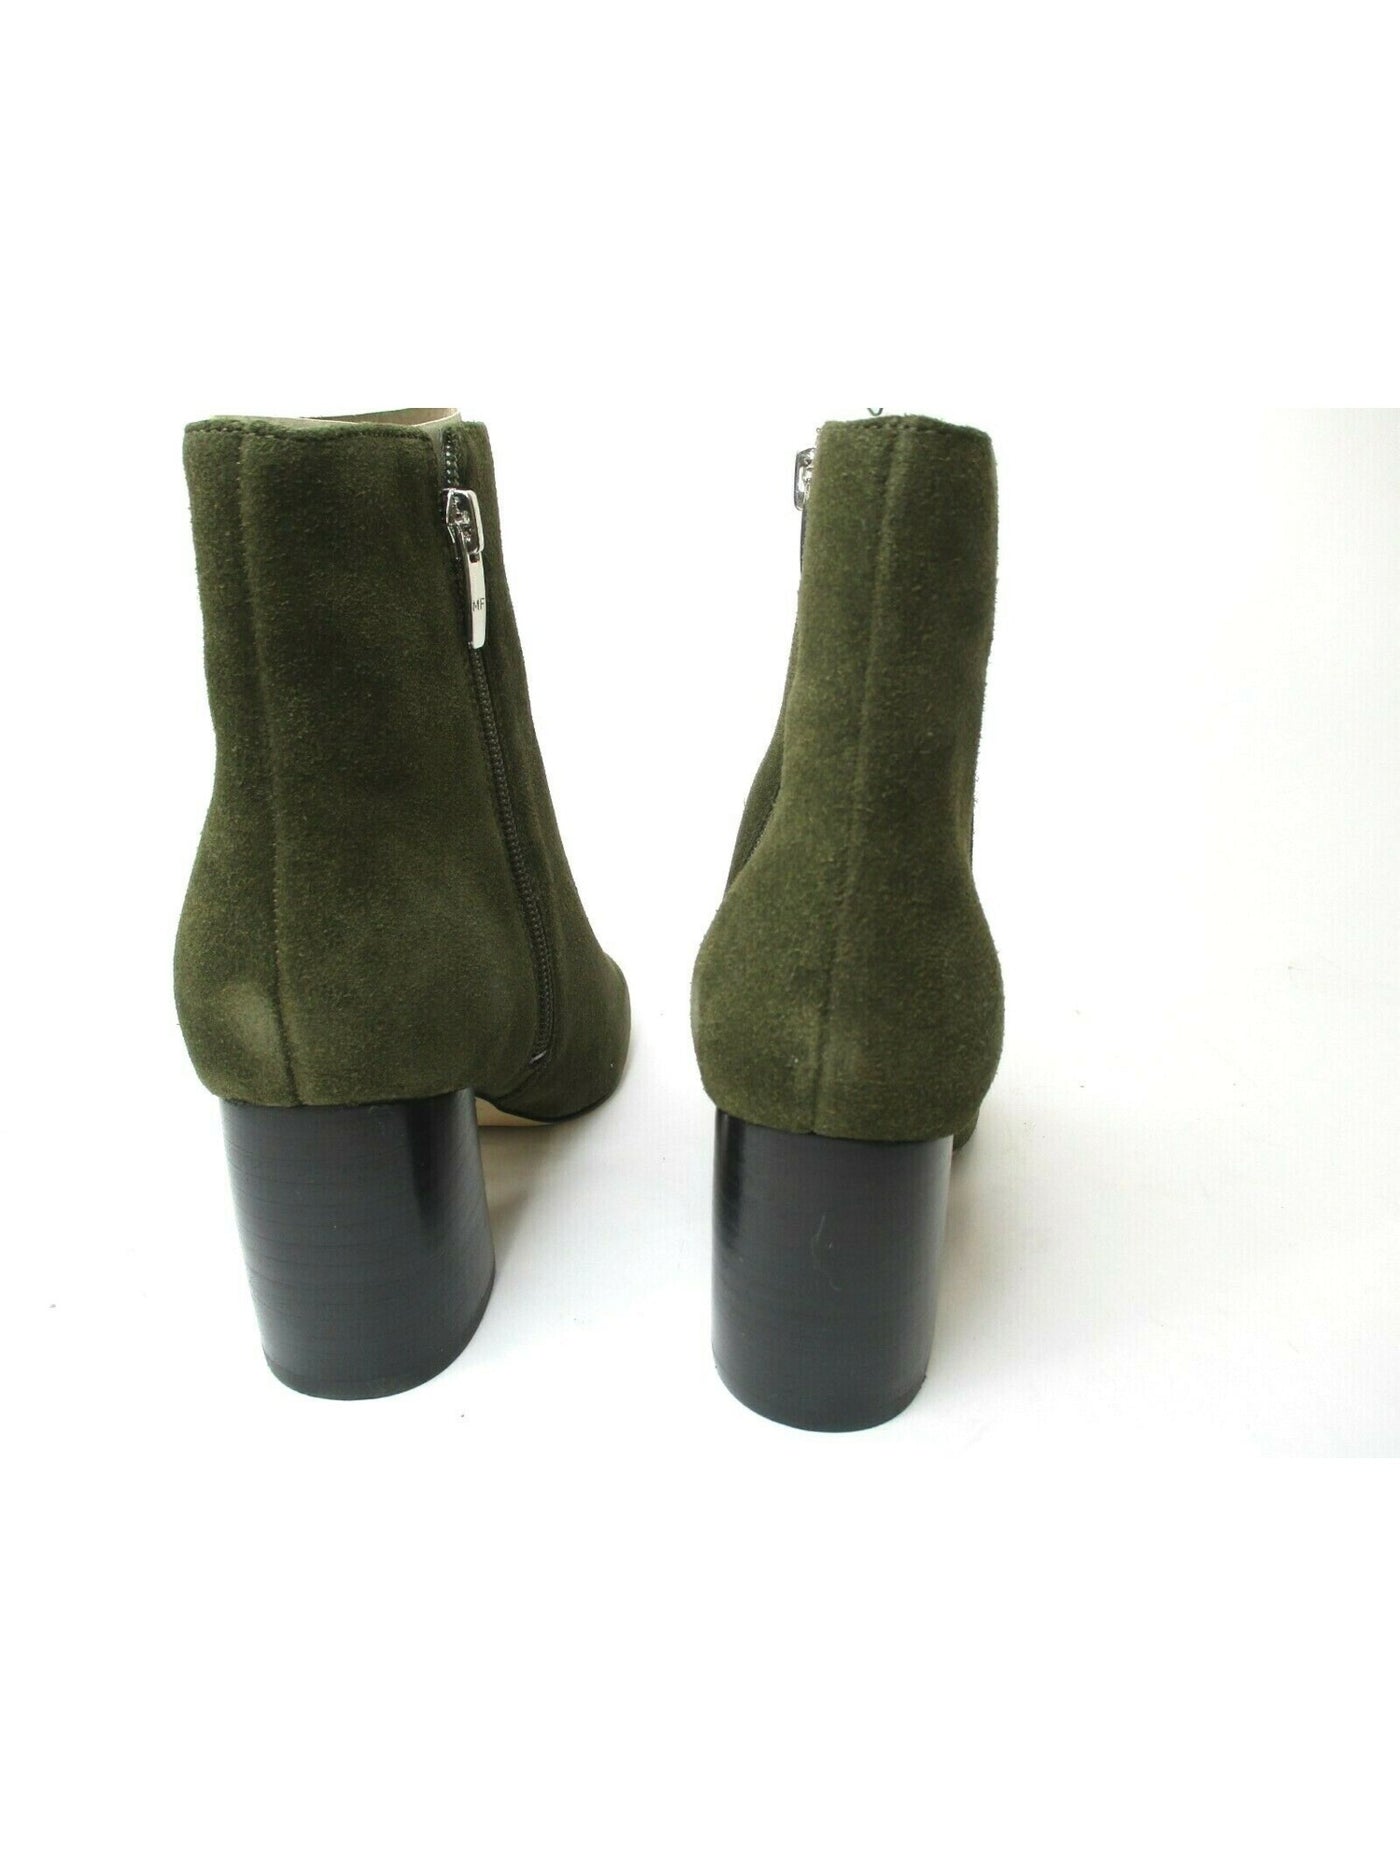 MARC FISHER Womens Green Cushioned Retire Pointed Toe Block Heel Zip-Up Leather Booties 8